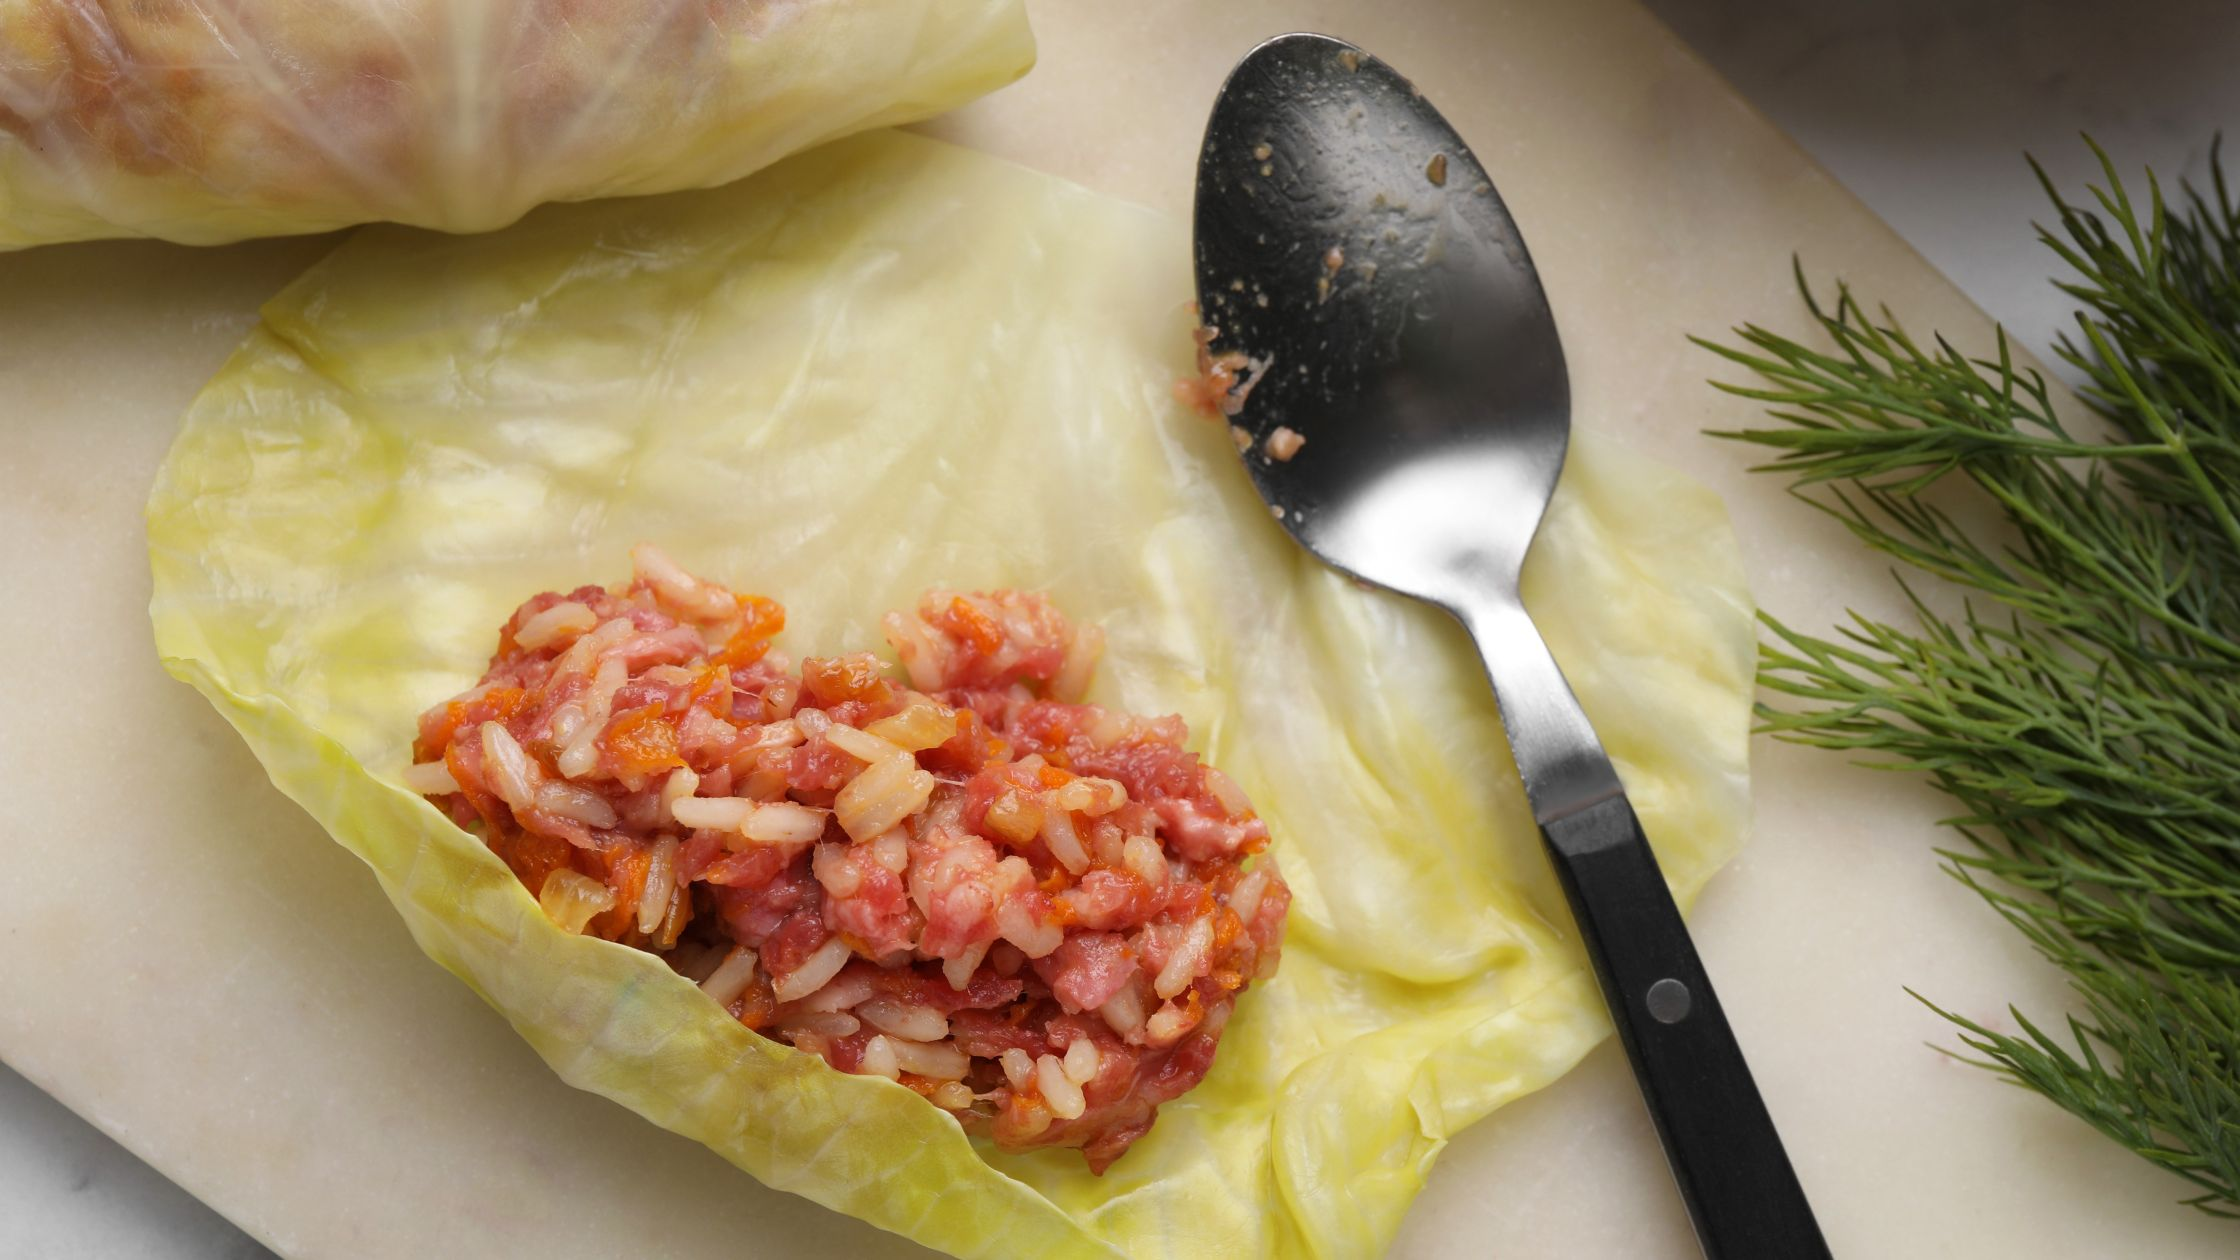 Cabbage Rolls are usually filled with a mix of rice and ground meat